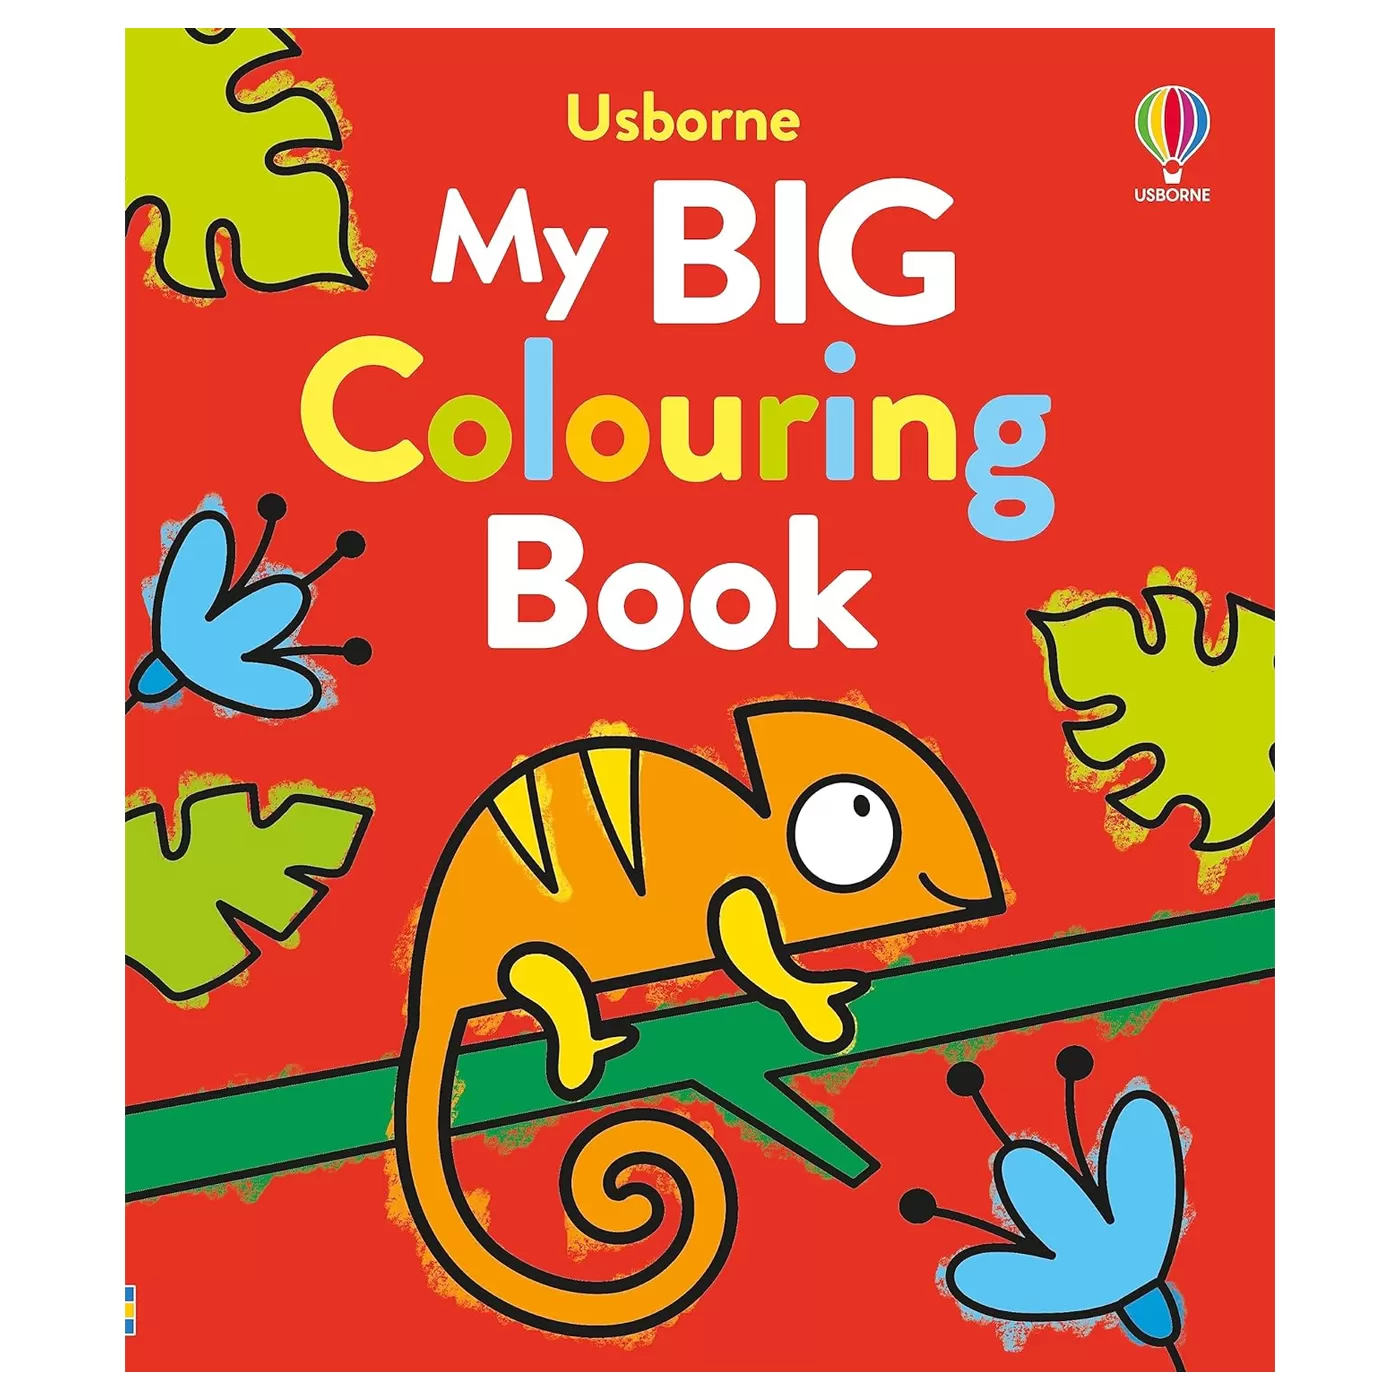  My Big Colouring Book